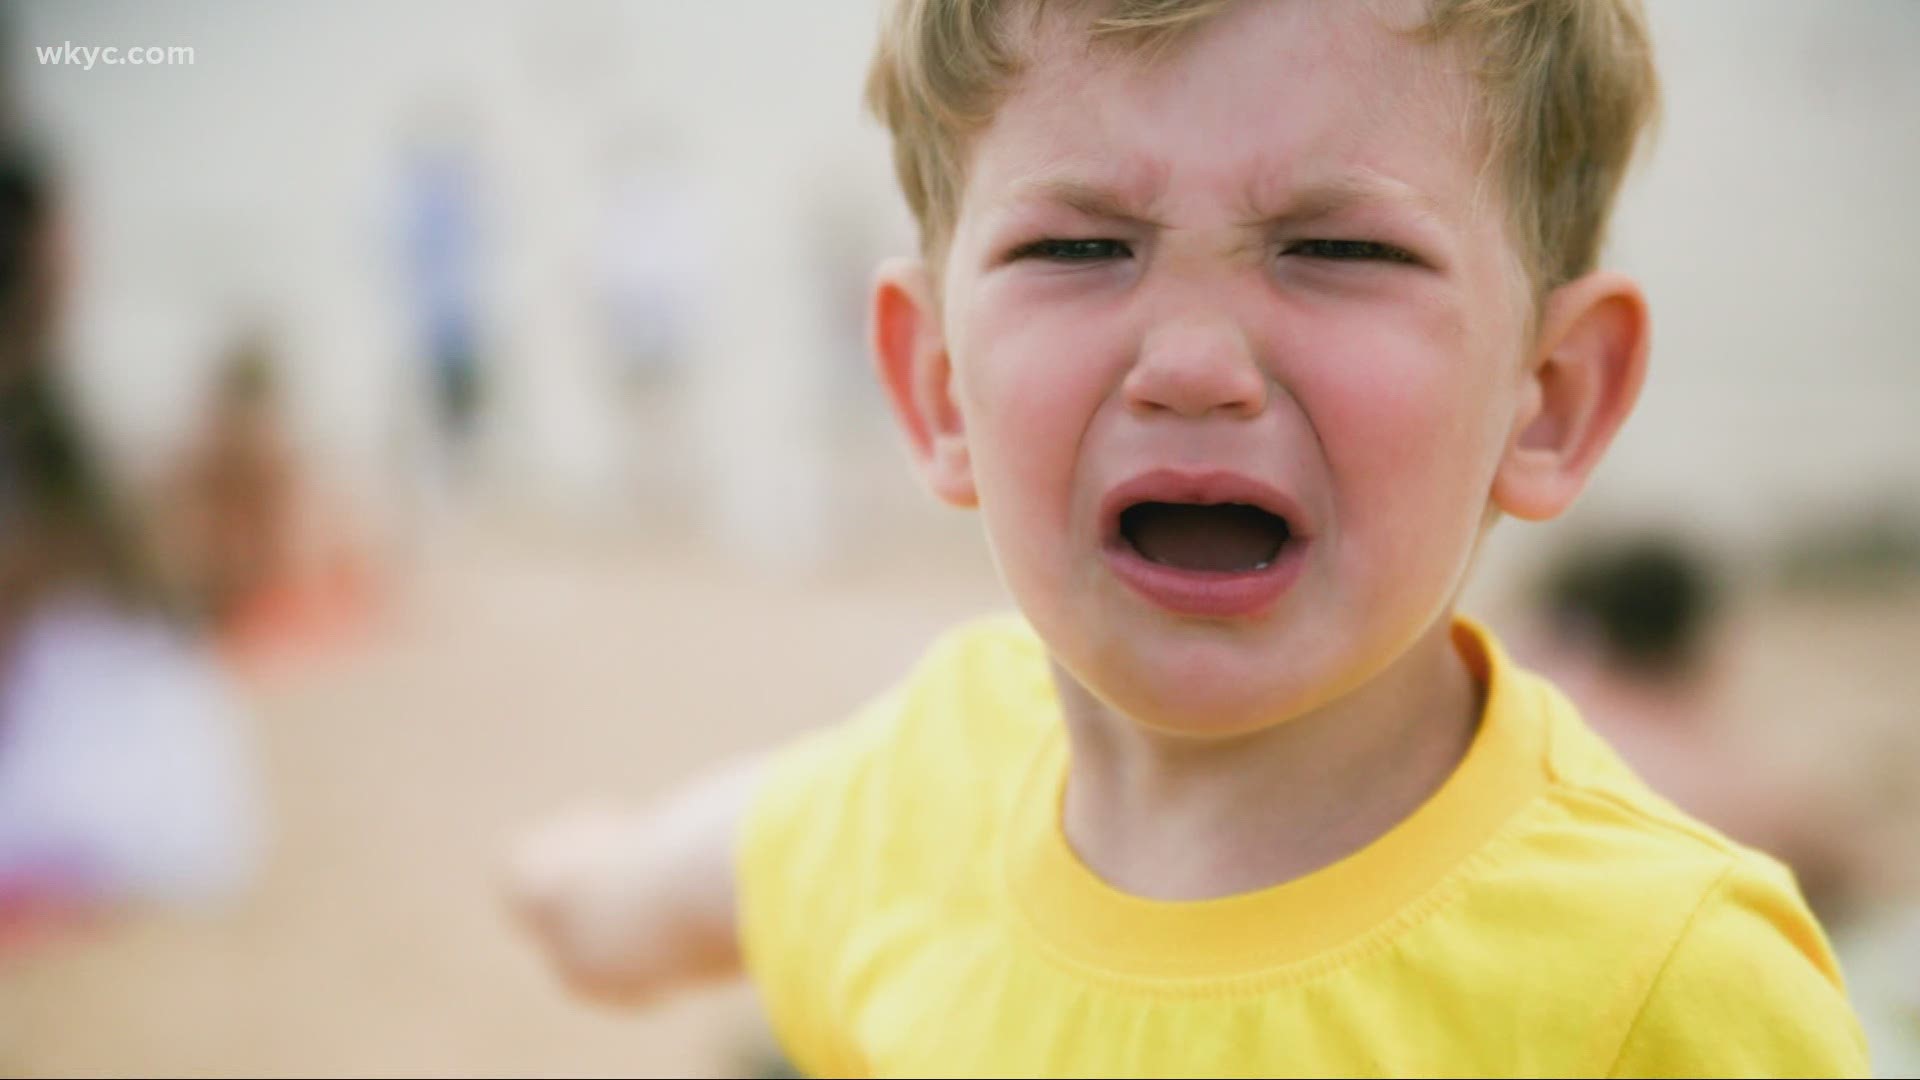 Need some help with your child's tantrums? We got some expert advice from the Cleveland Clinic on what parents need to know.